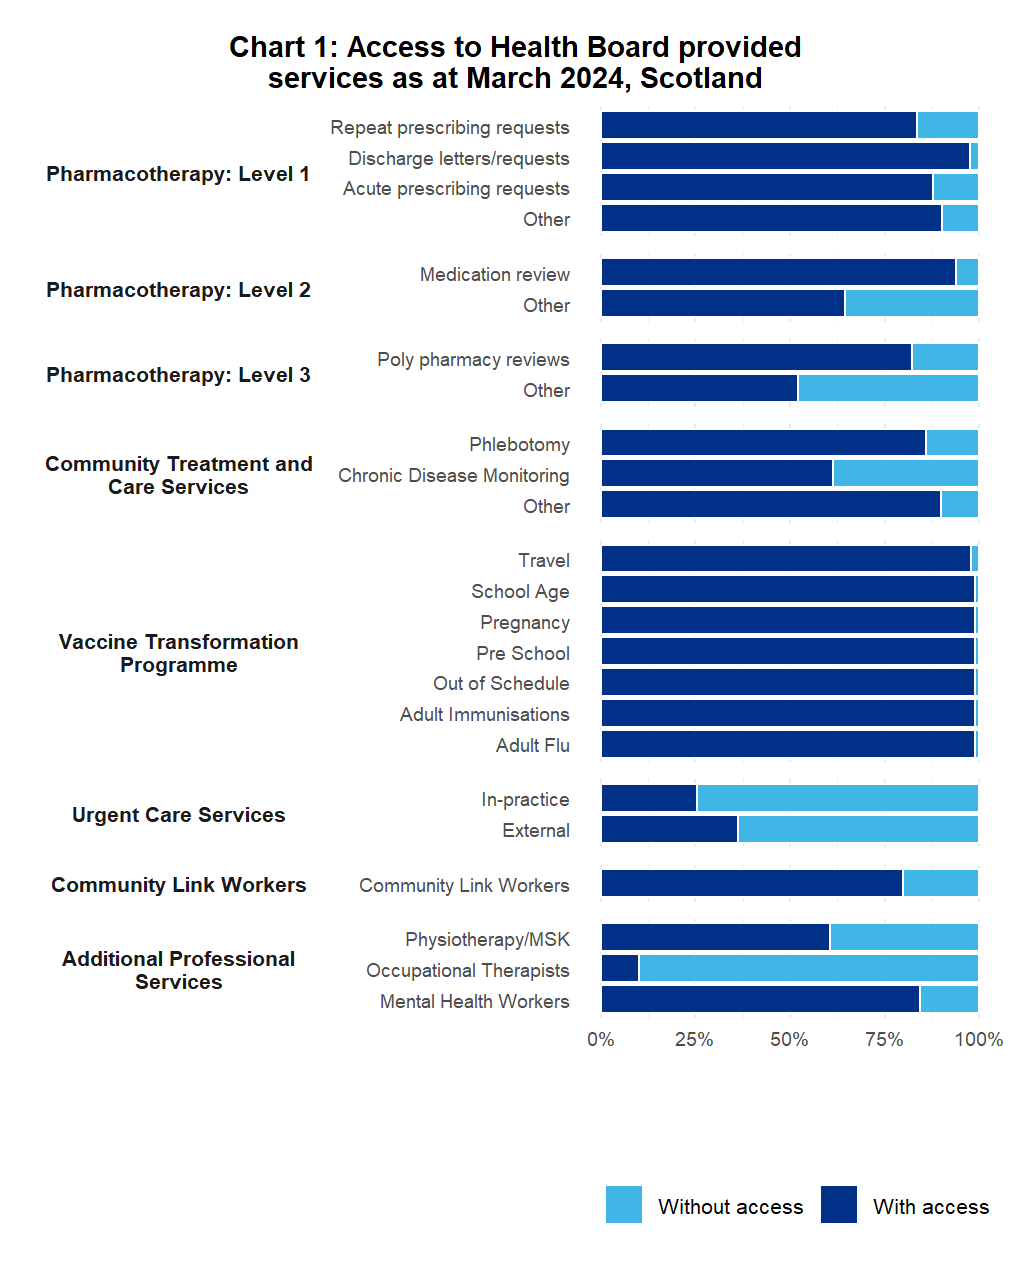 Chart shows the percentage of practices that have access to Health Board provided services by service type as described in Section 5 in the main body of the report.